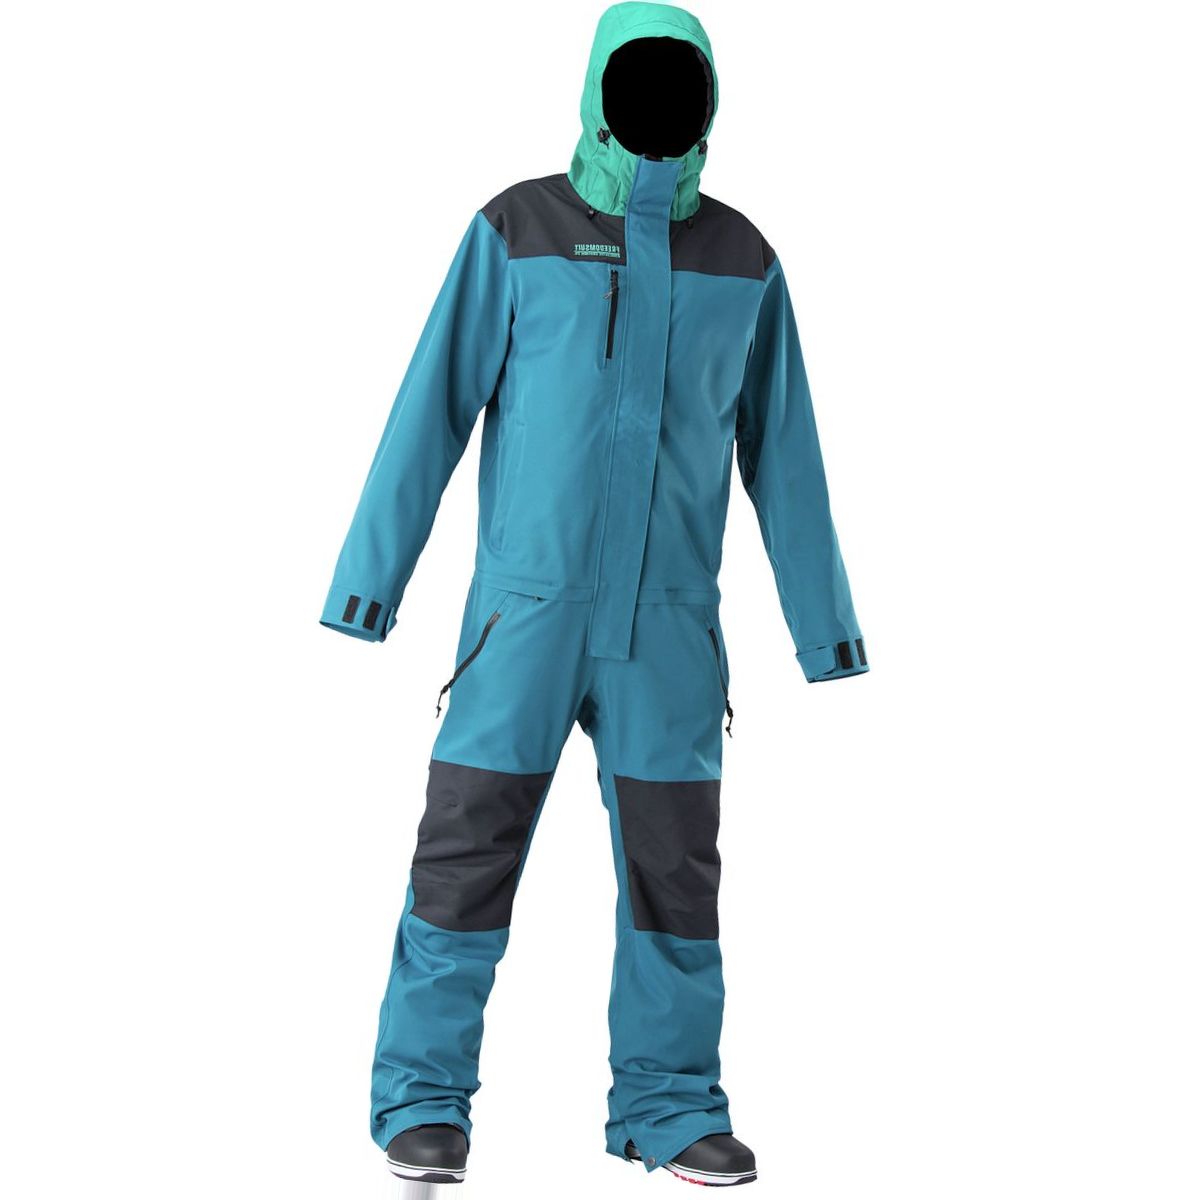 Top 17 cheap Ski Clothing for Man in 2019